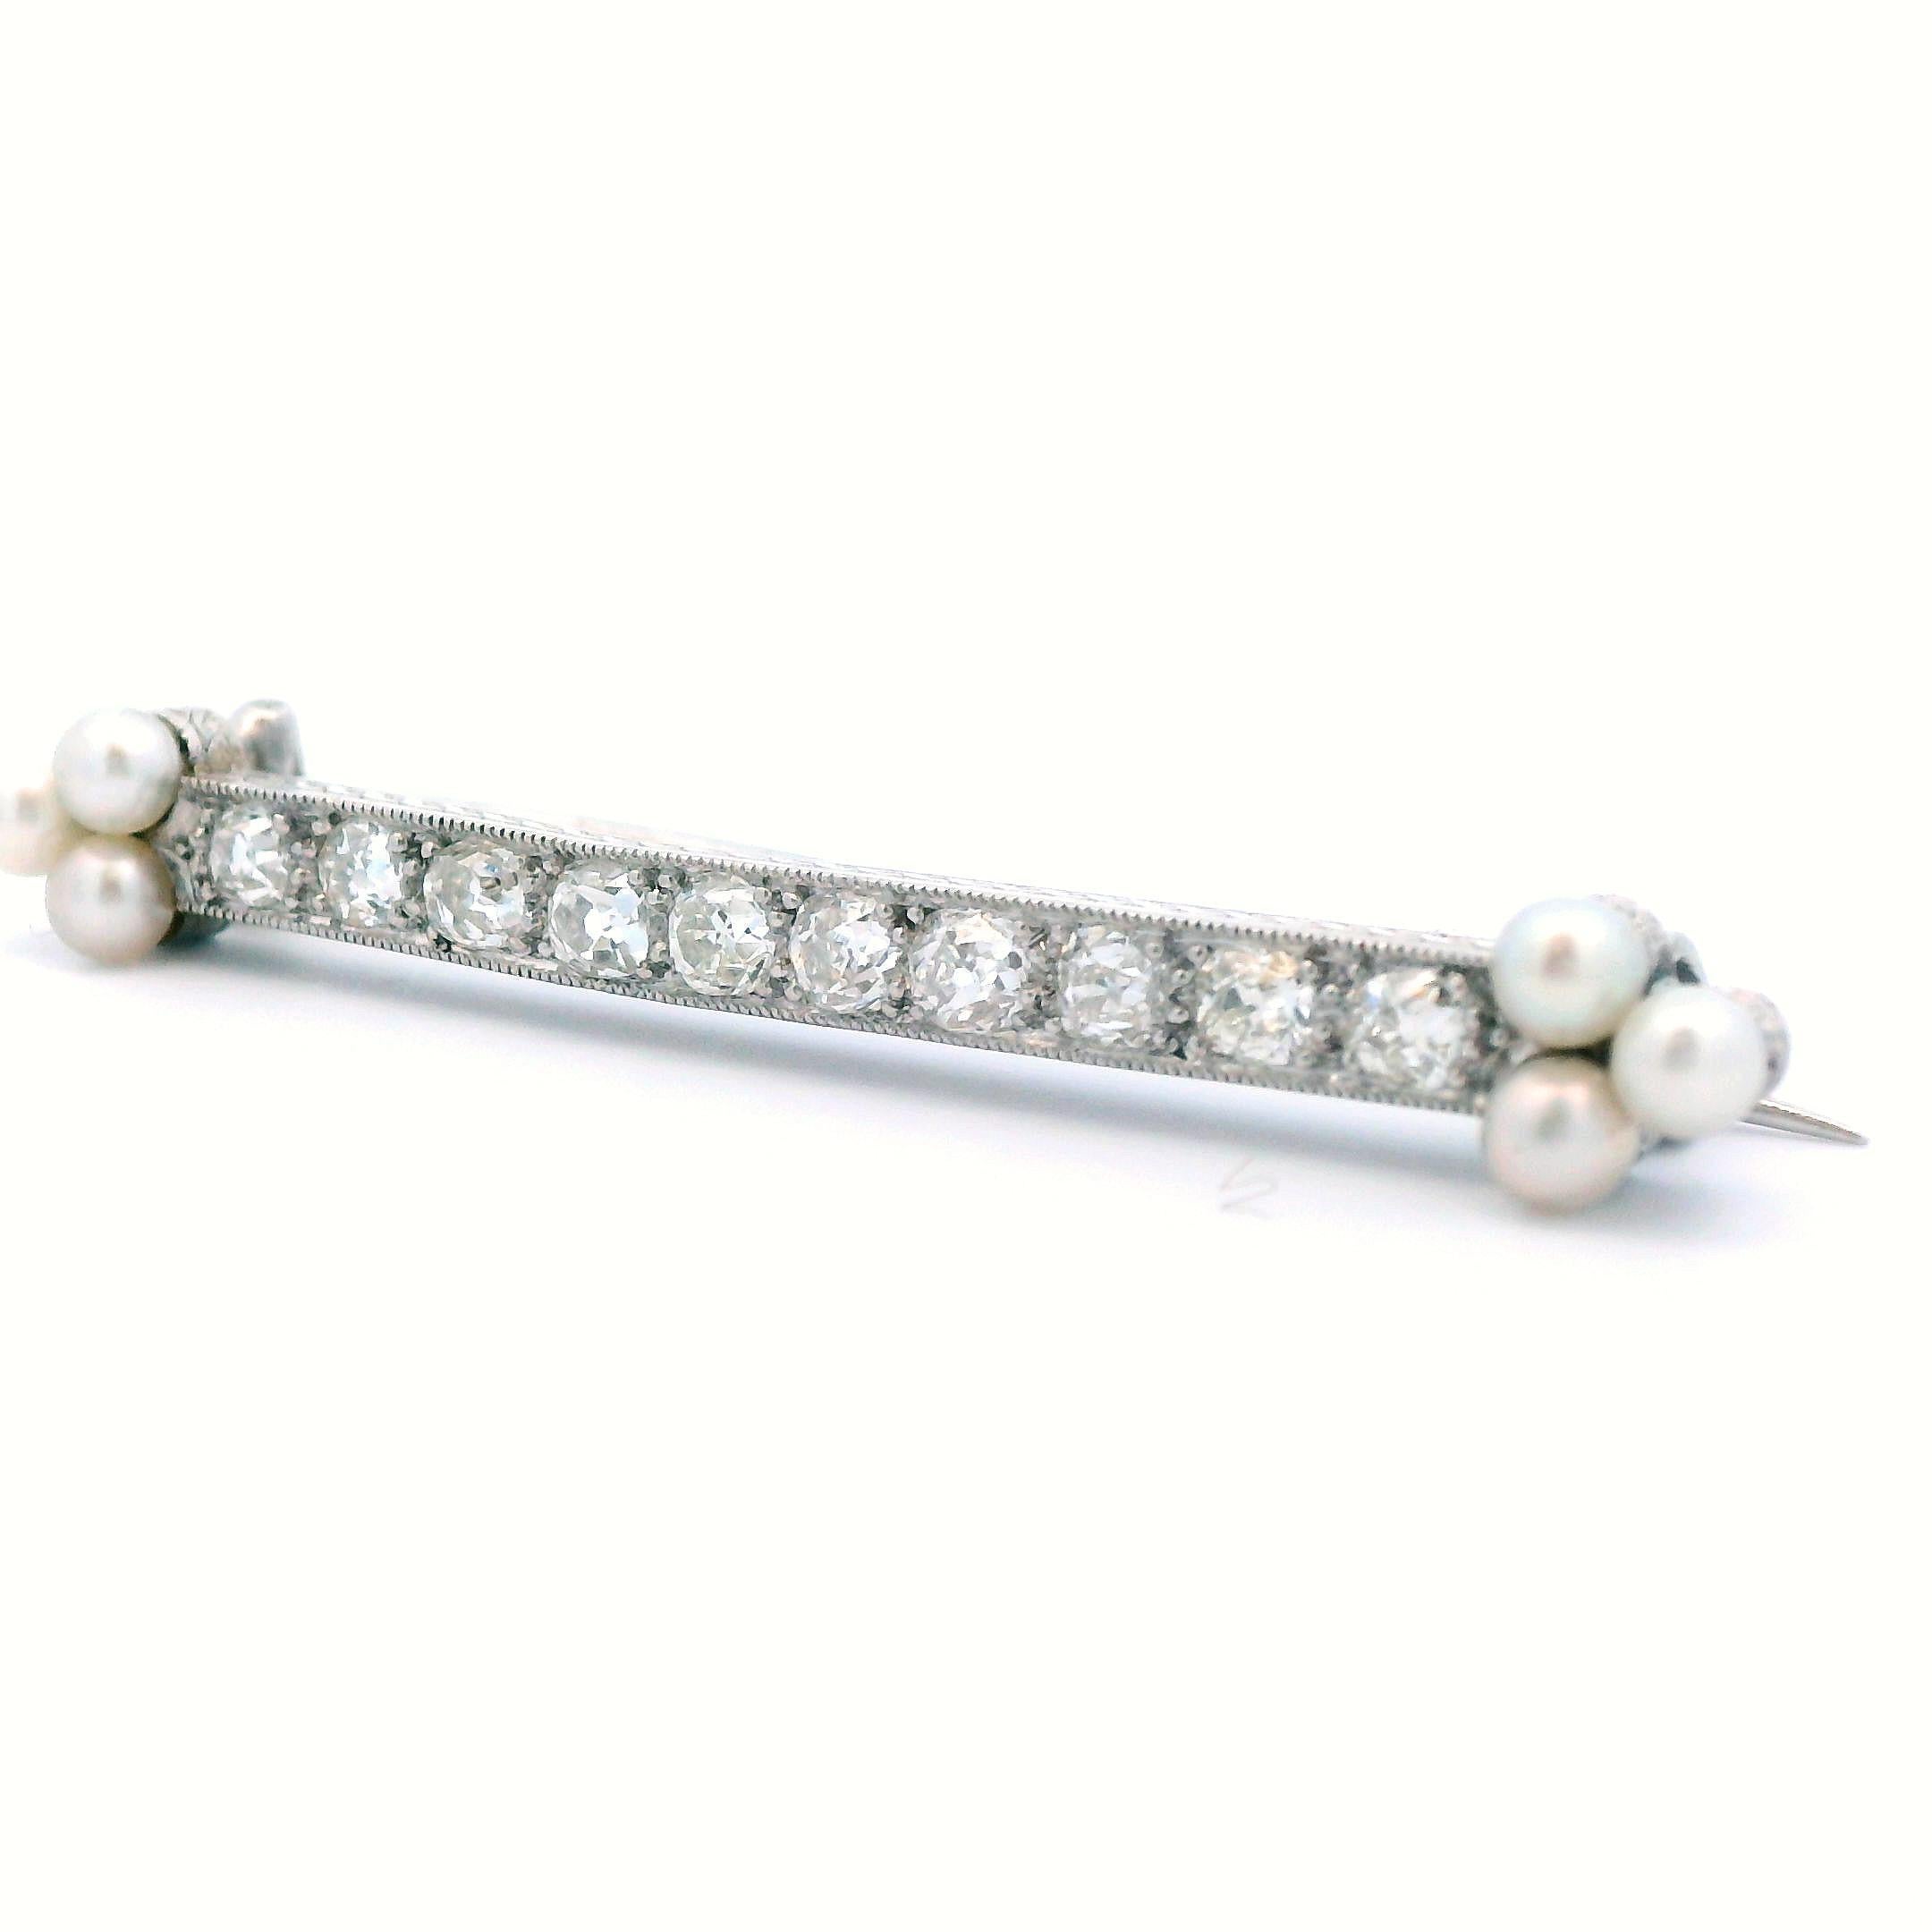 1910 Edwardian Platinum Diamond and Pearl Brooch In Good Condition For Sale In Lexington, KY